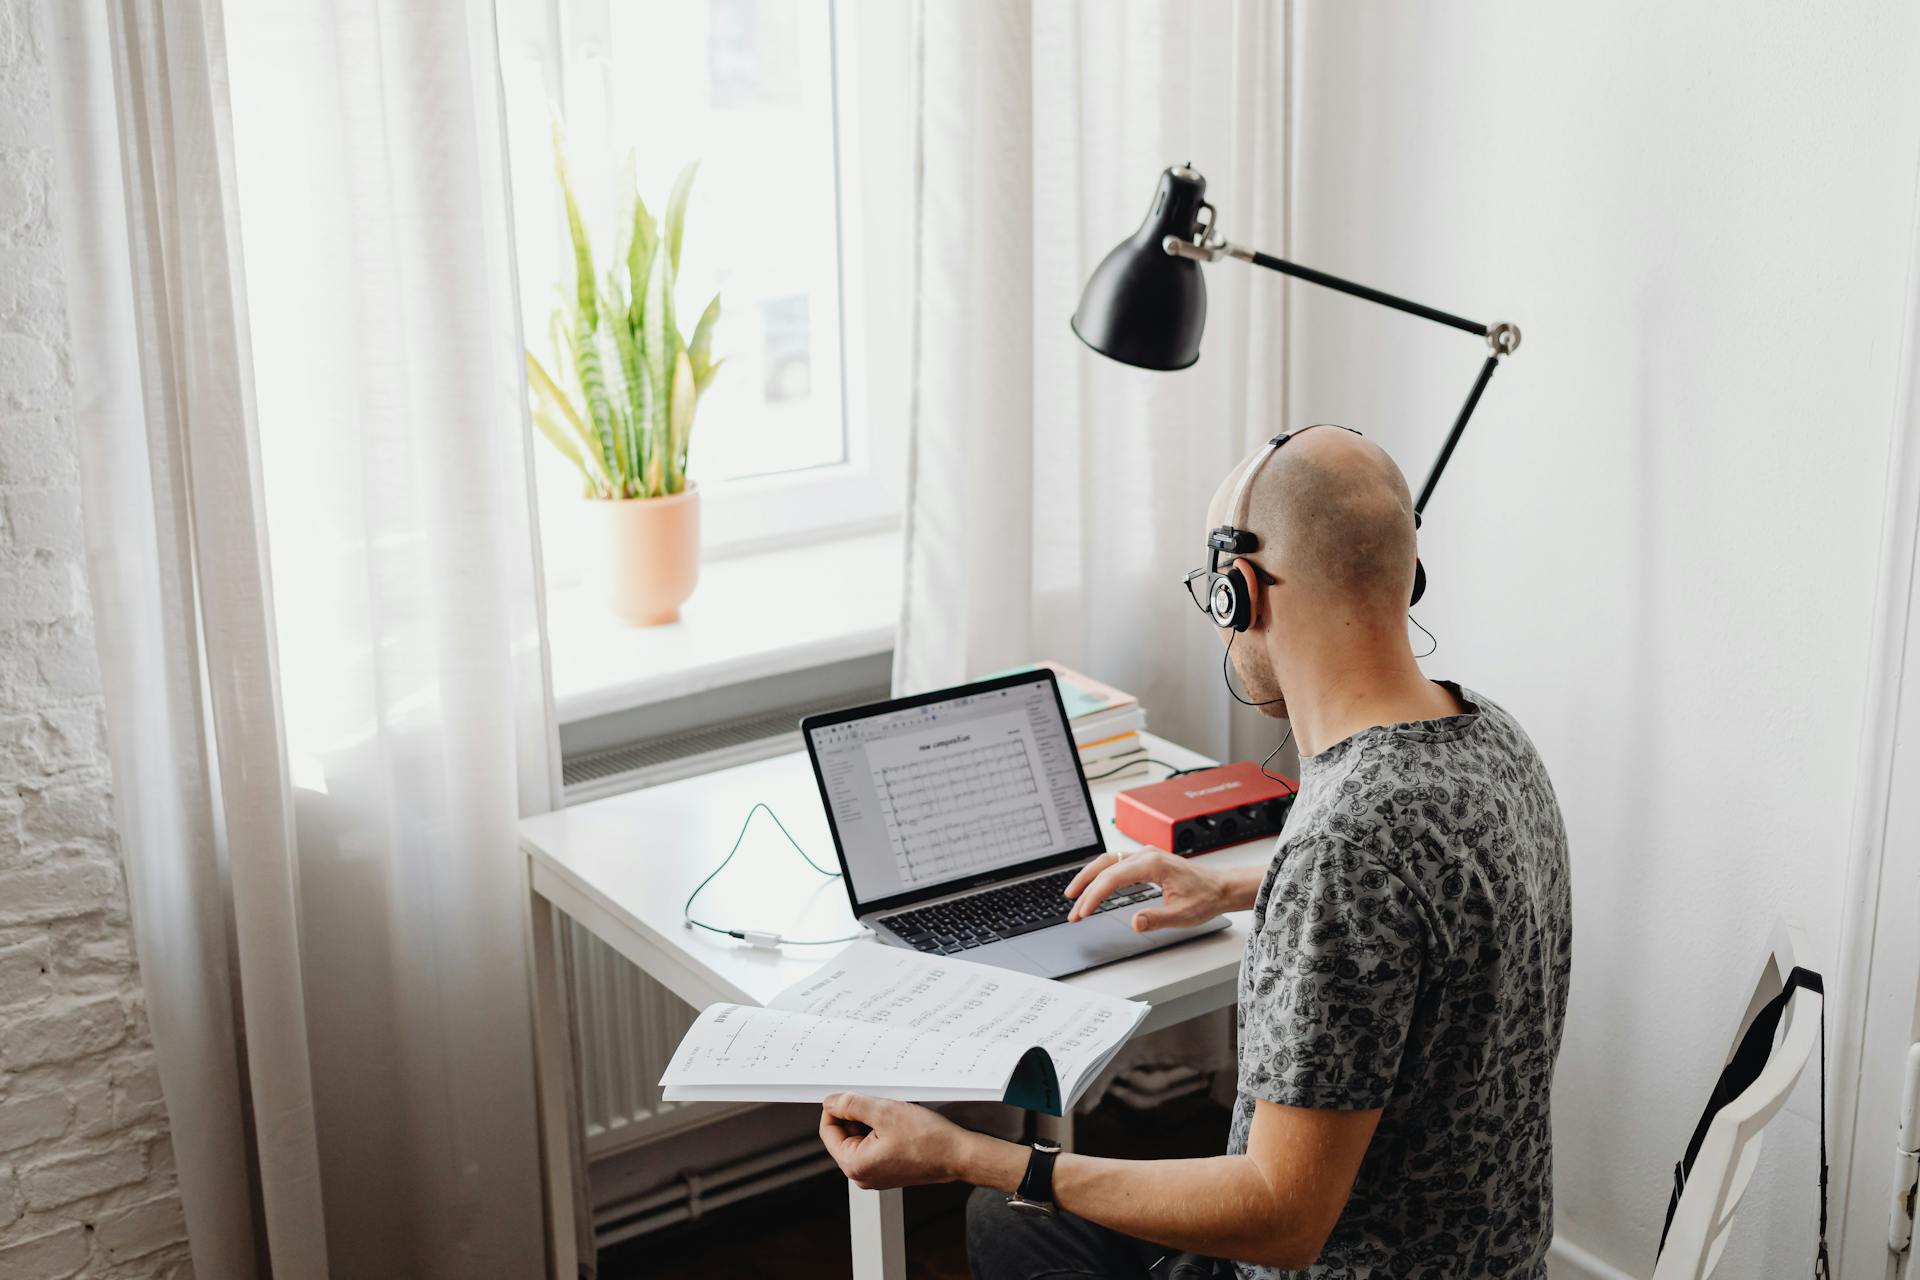 A Man in Printed Shirt Wearing Headset while Using His Laptop